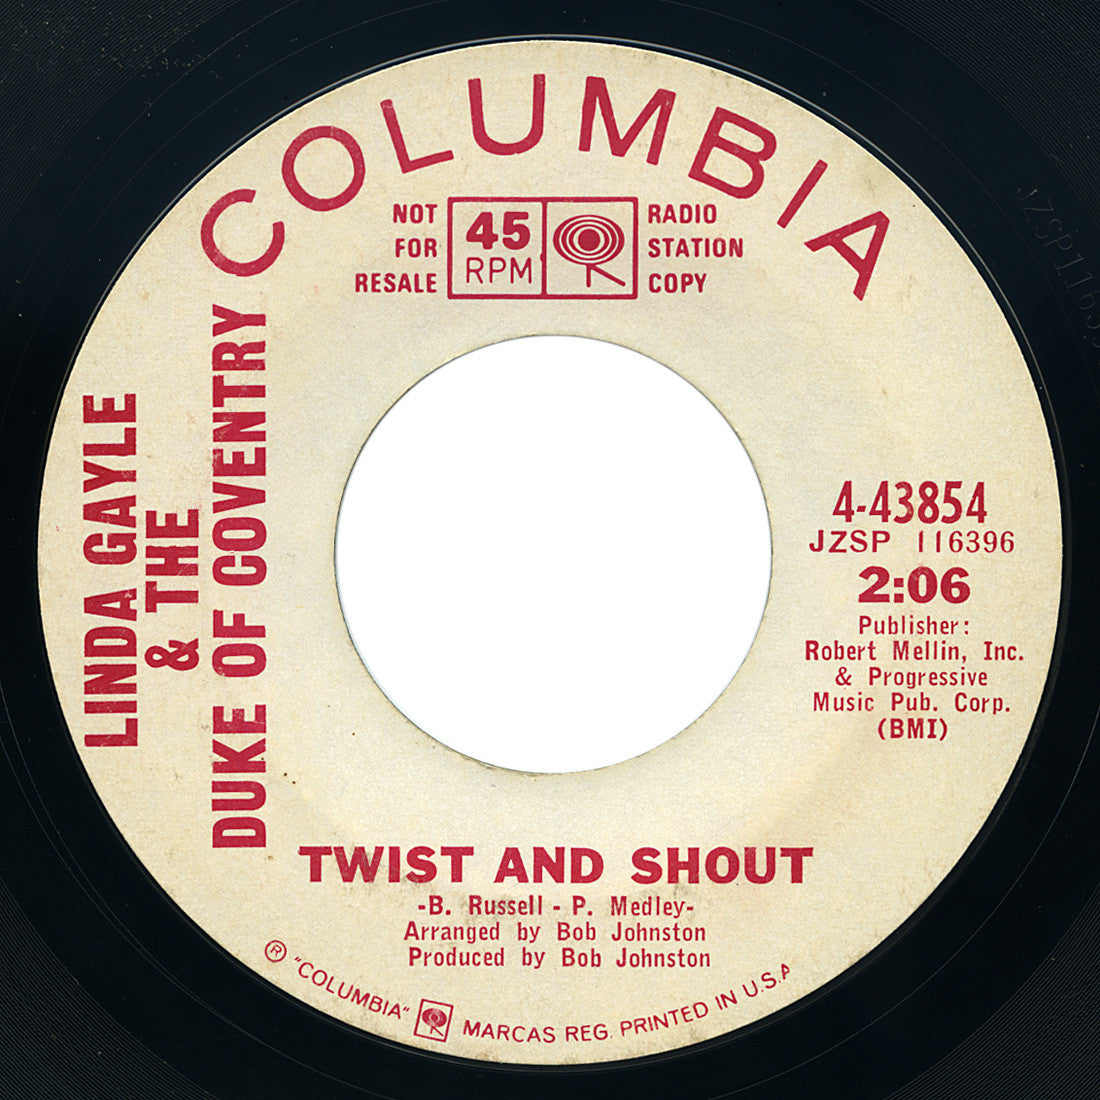 Linda Gayle & The Duke Of Coventry – Twist And Shout – Columbia